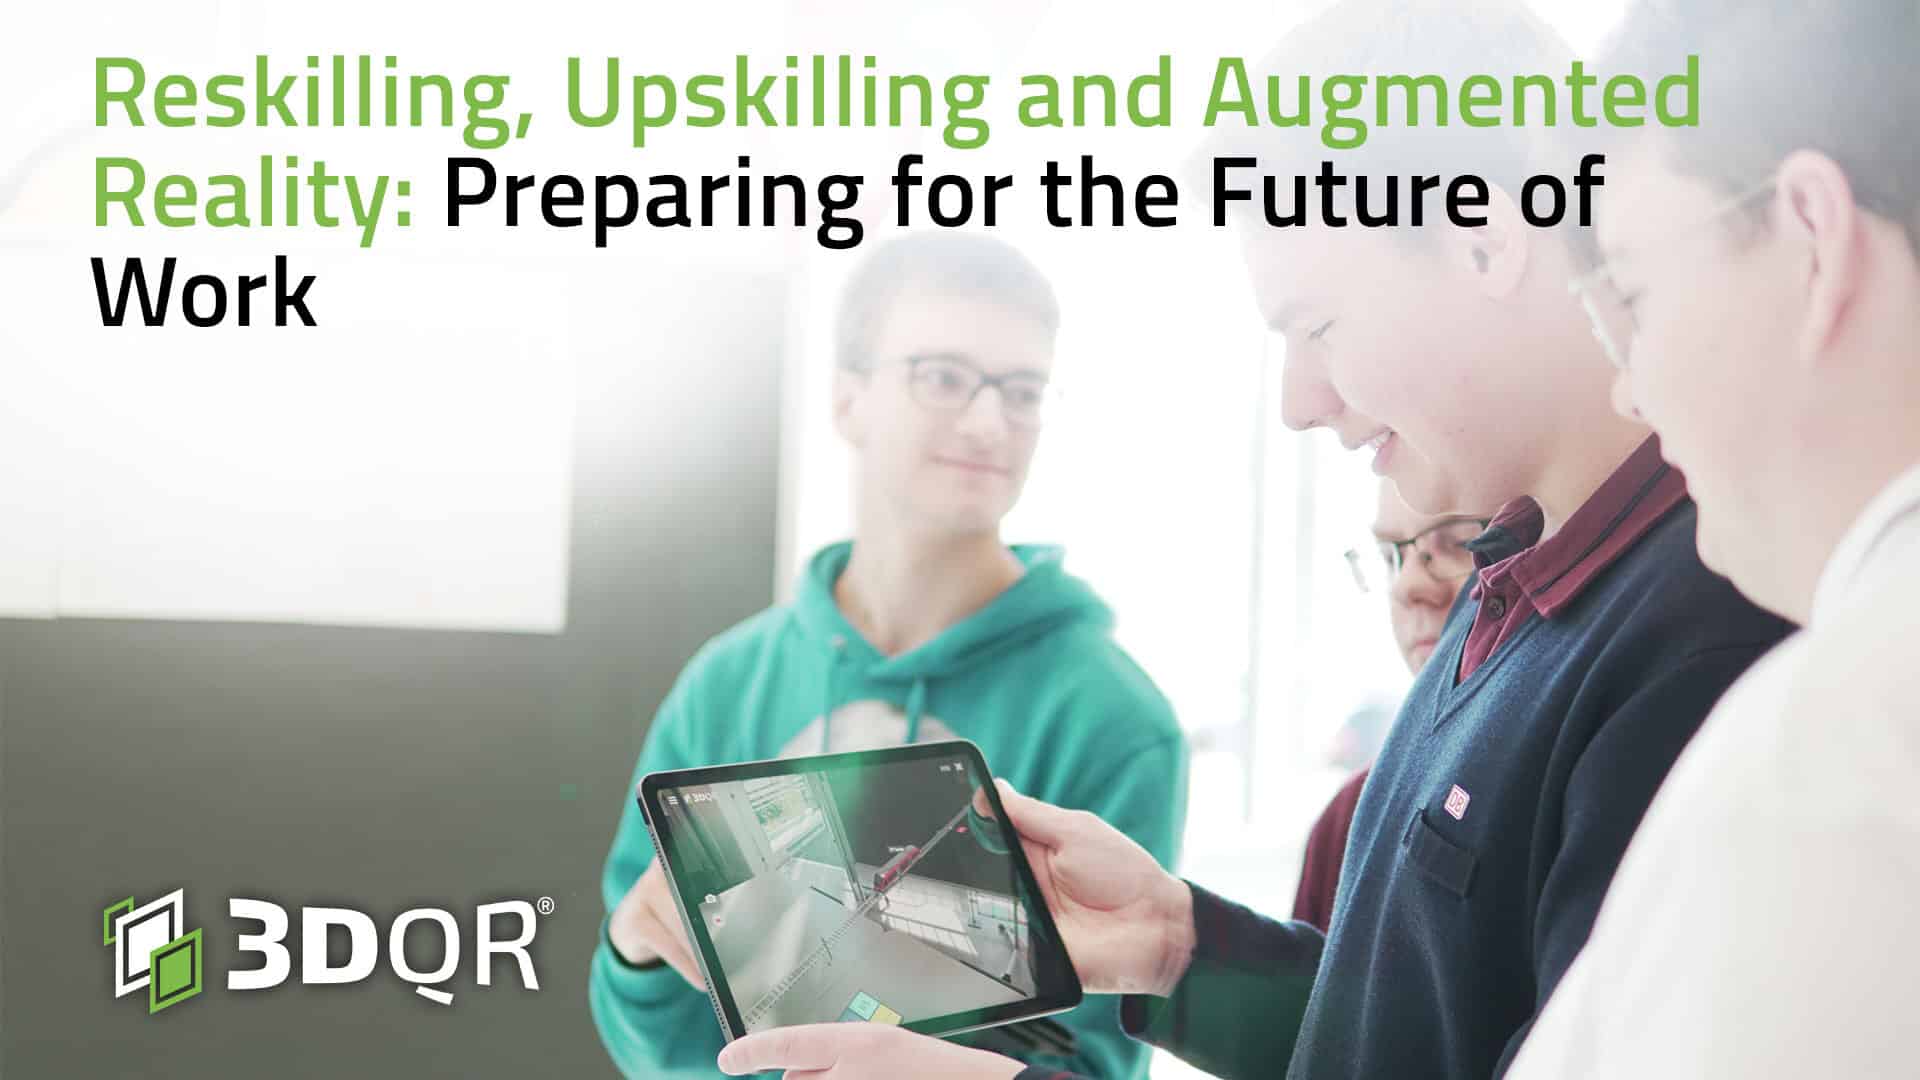 Reskilling, Upskilling, and Augmented Reality: Preparing for the Future of Work